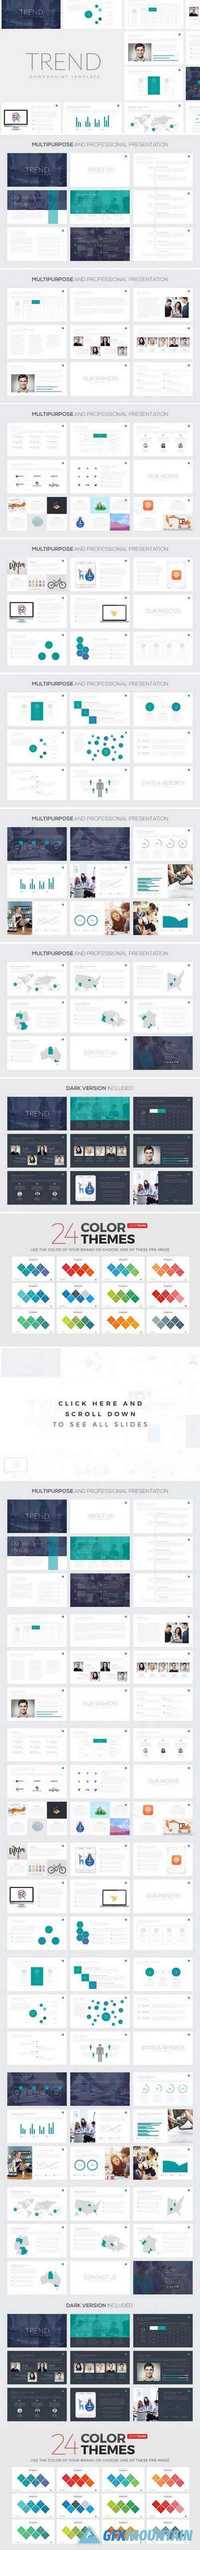 Trend PowerPoint Template 800457